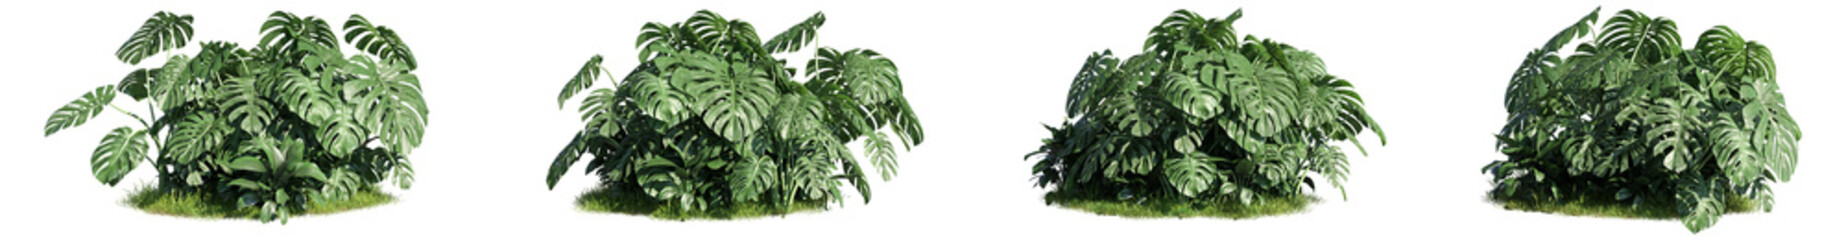 set of monstera plants, 3D rendering with a transparent background, for digital composition, illustration, architecture visualization